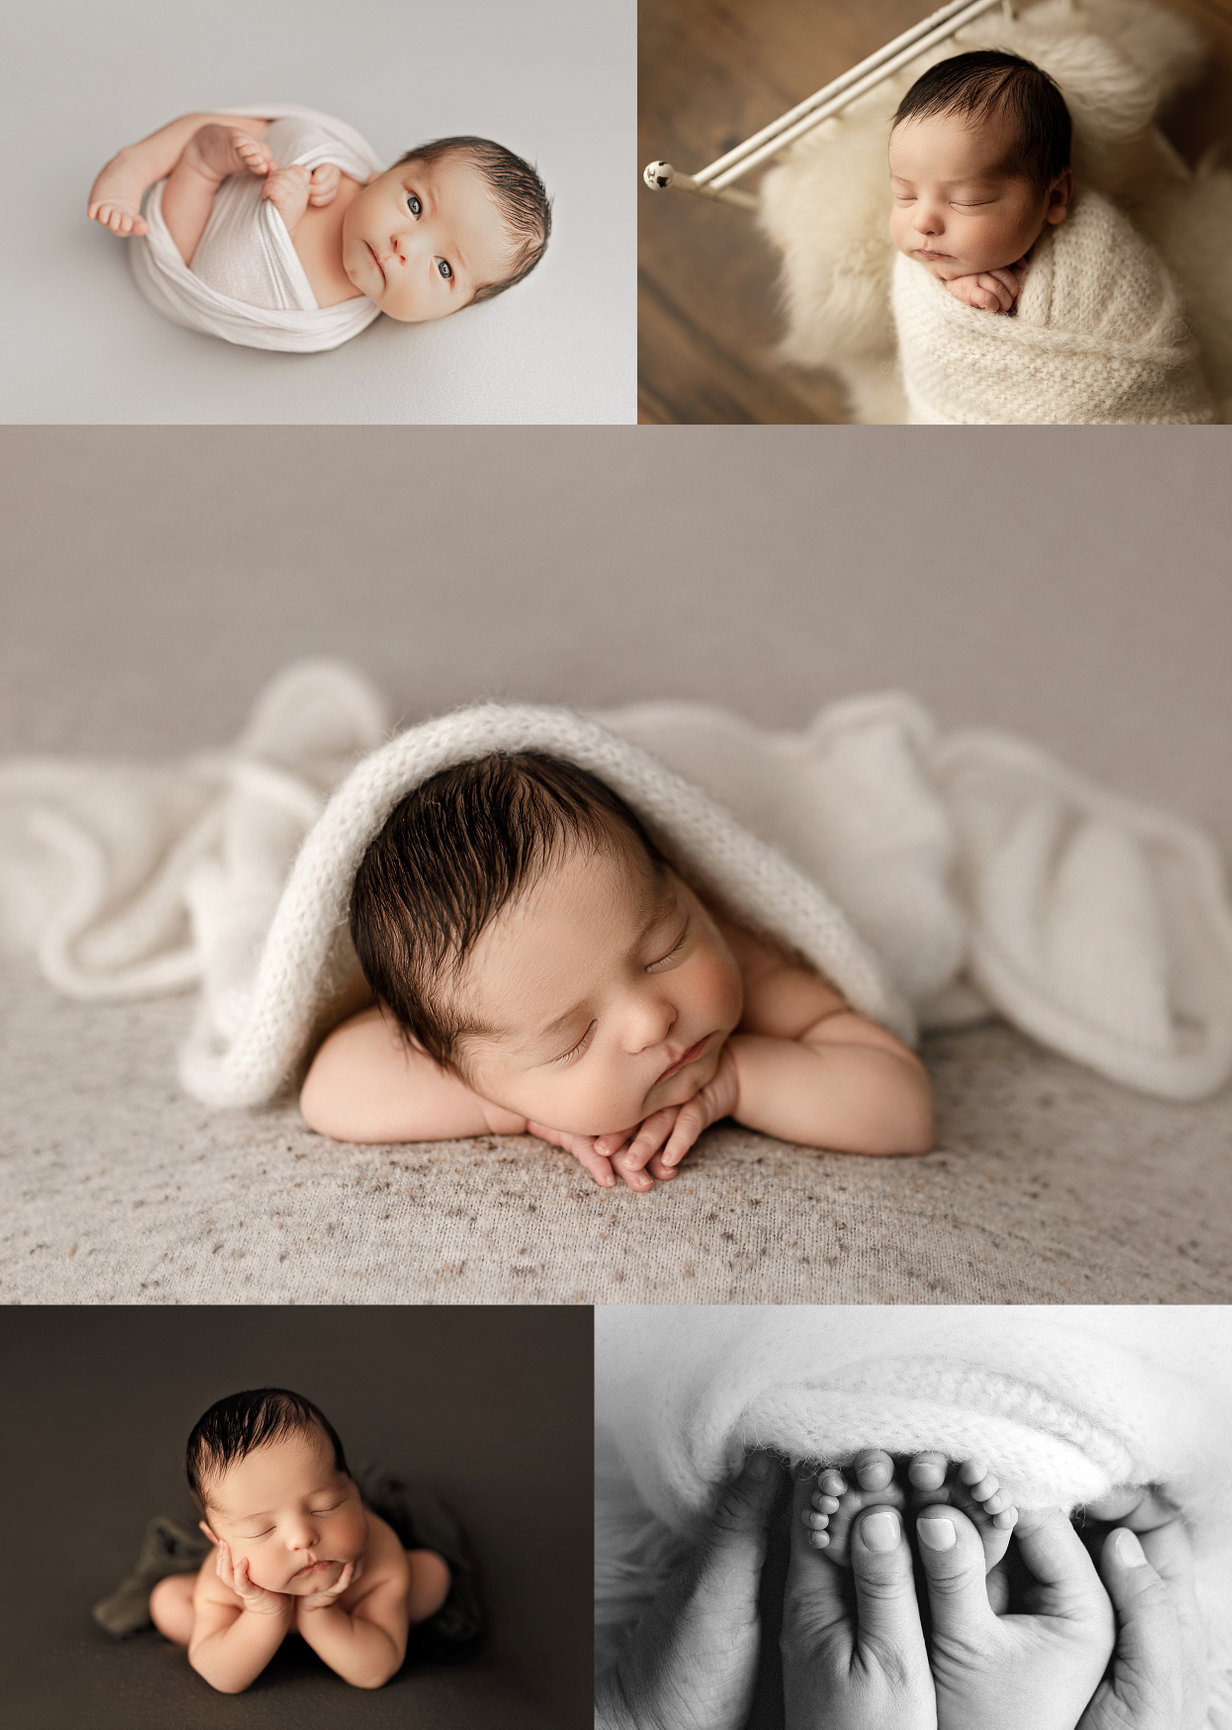 Newborn Photography Poses: 6 Simple and Easy for Beginners | Baby boy newborn  photography, Newborn photography boy, Newborn baby photography